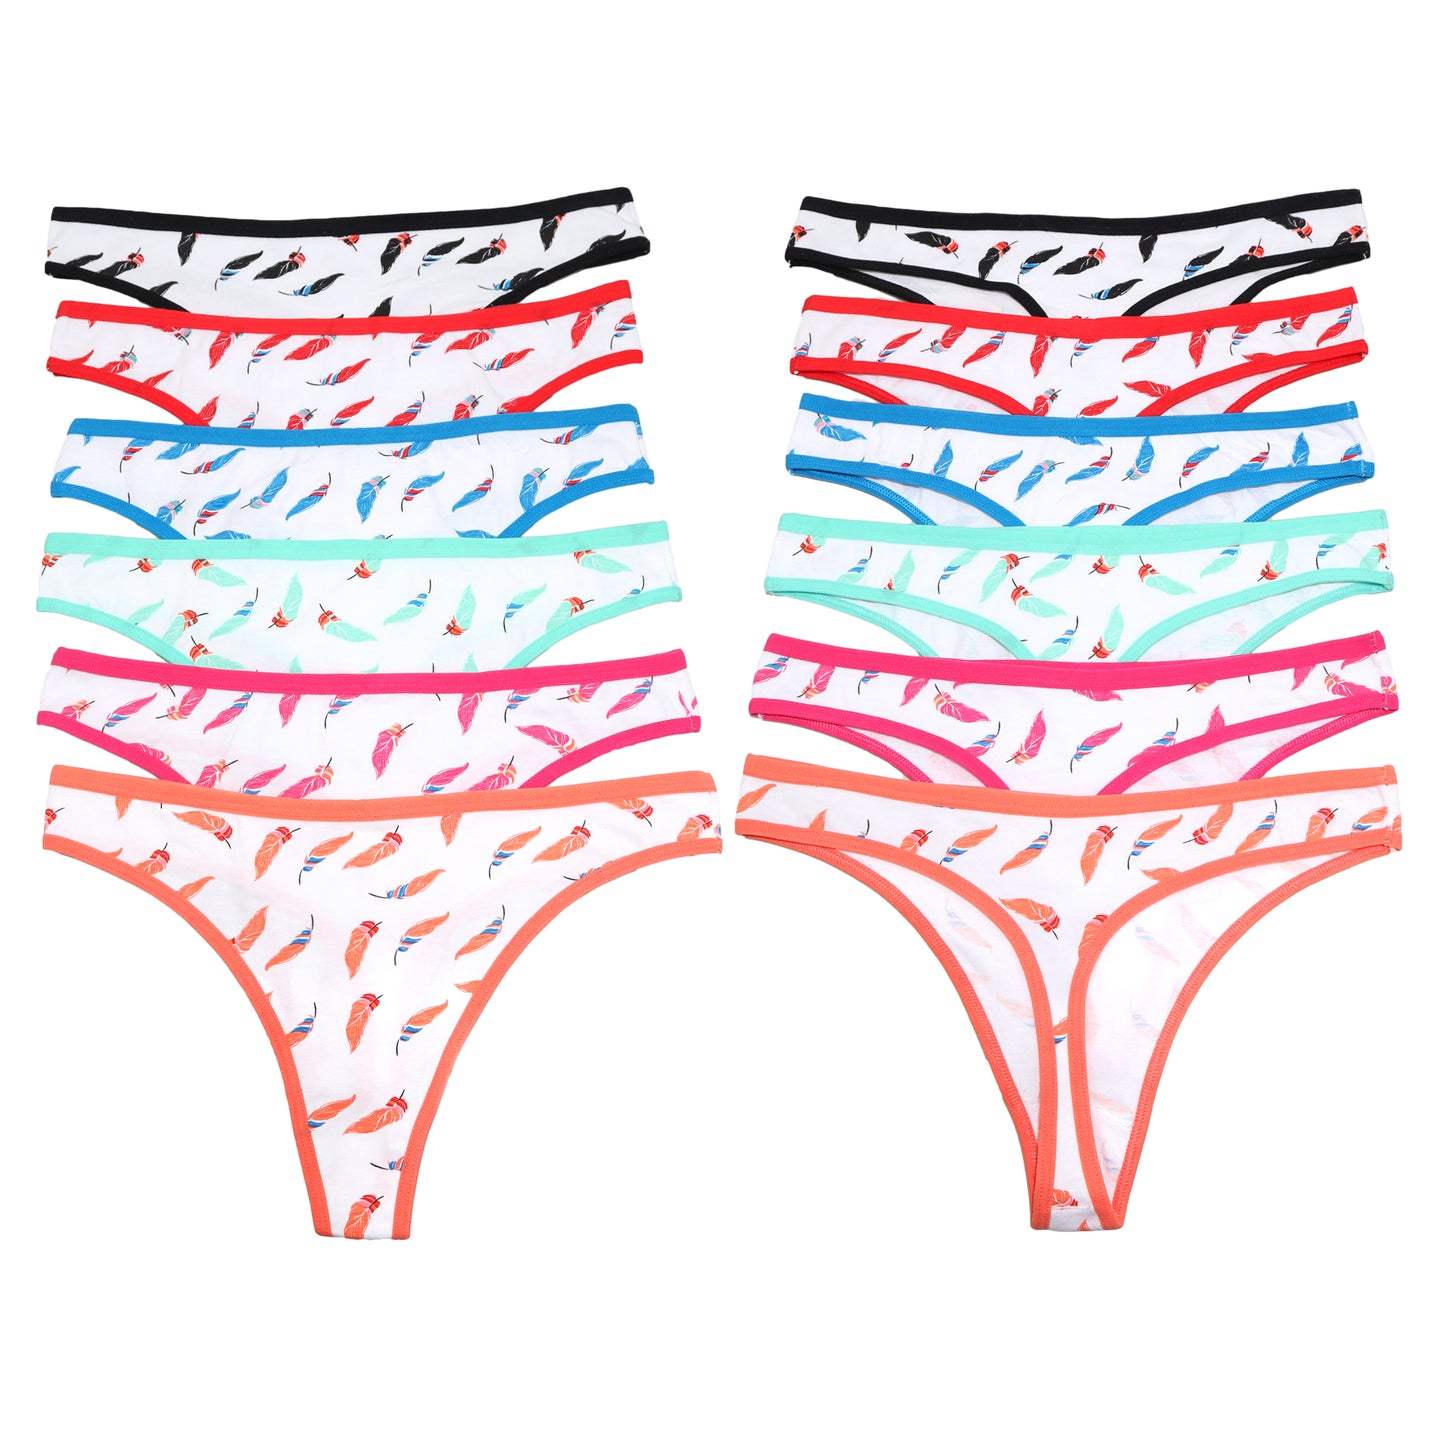 Cotton Thong Panties with Feather Print Design (12-Pack)